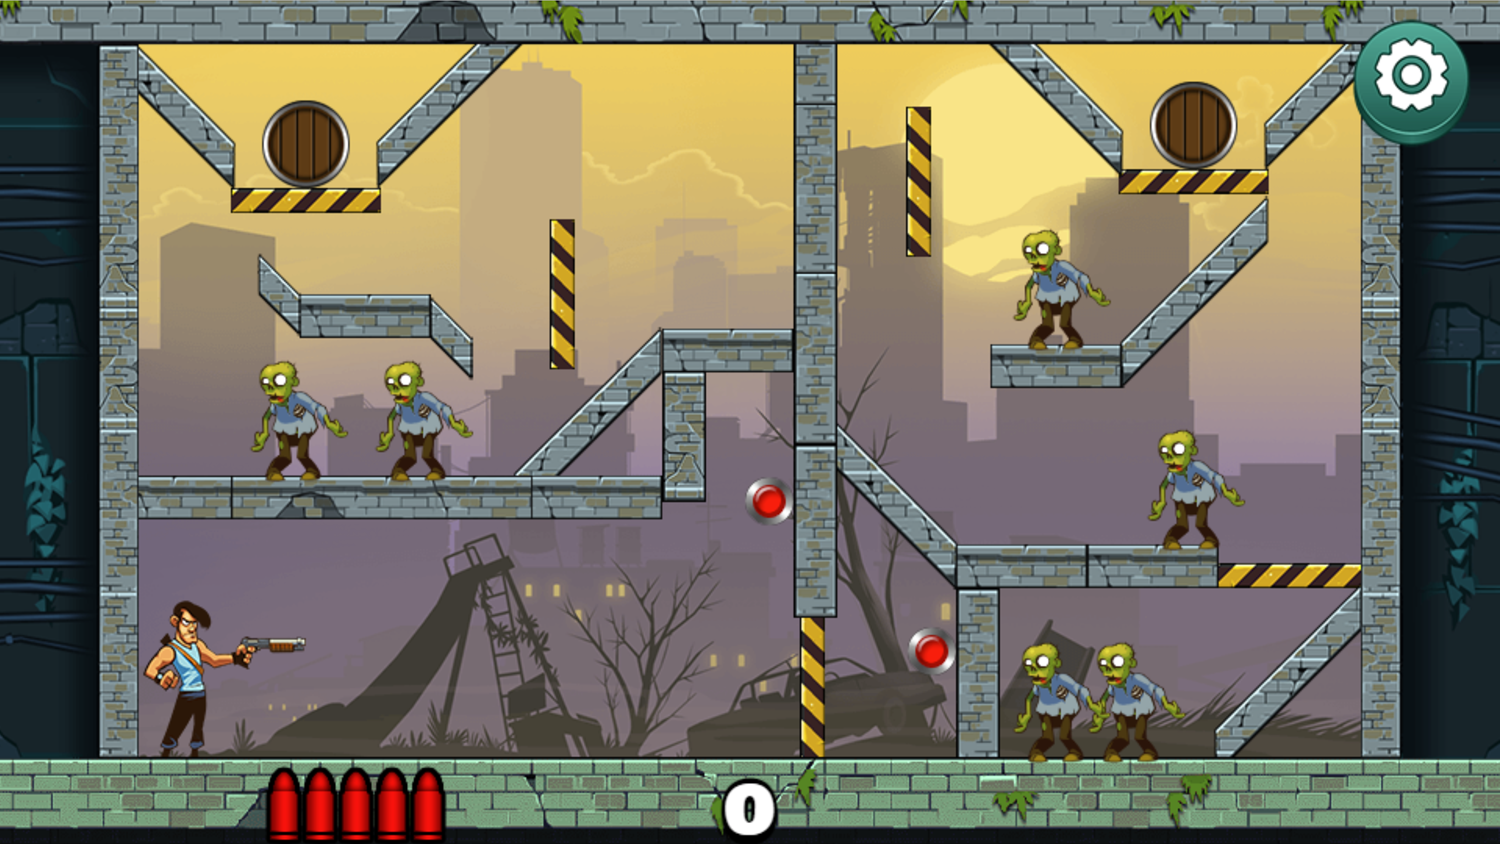 Stupid Zombies Game Level With Switches In It Screenshot.